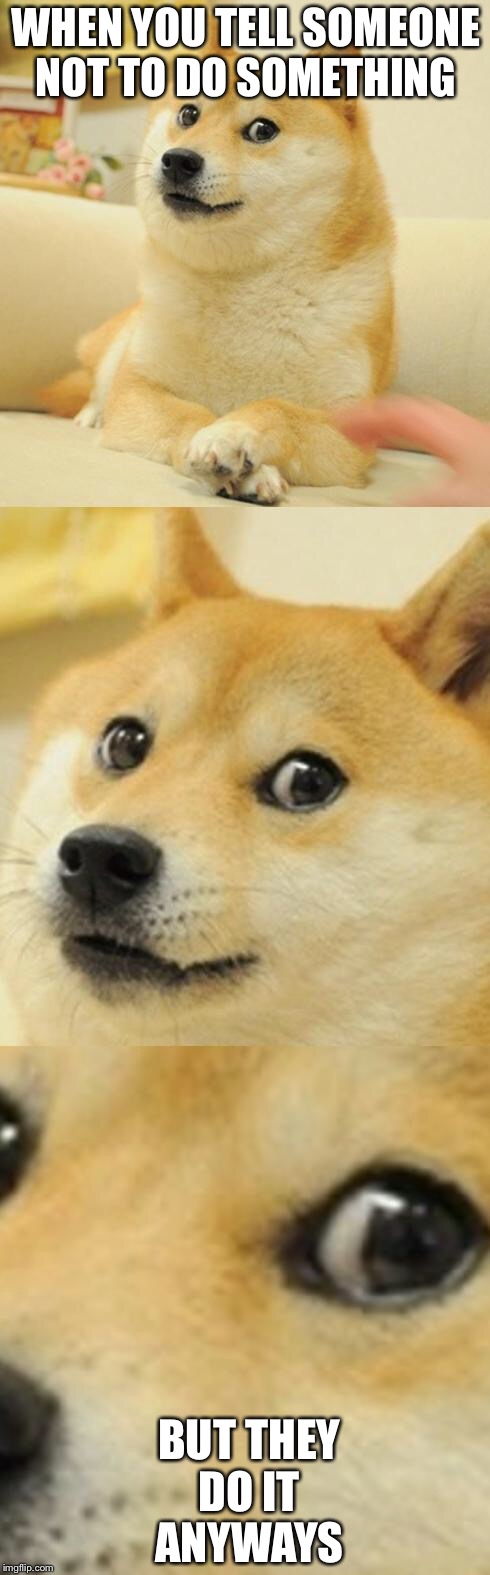 Doge Game |  WHEN YOU TELL SOMEONE NOT TO DO SOMETHING; BUT THEY DO IT ANYWAYS | image tagged in doge game | made w/ Imgflip meme maker